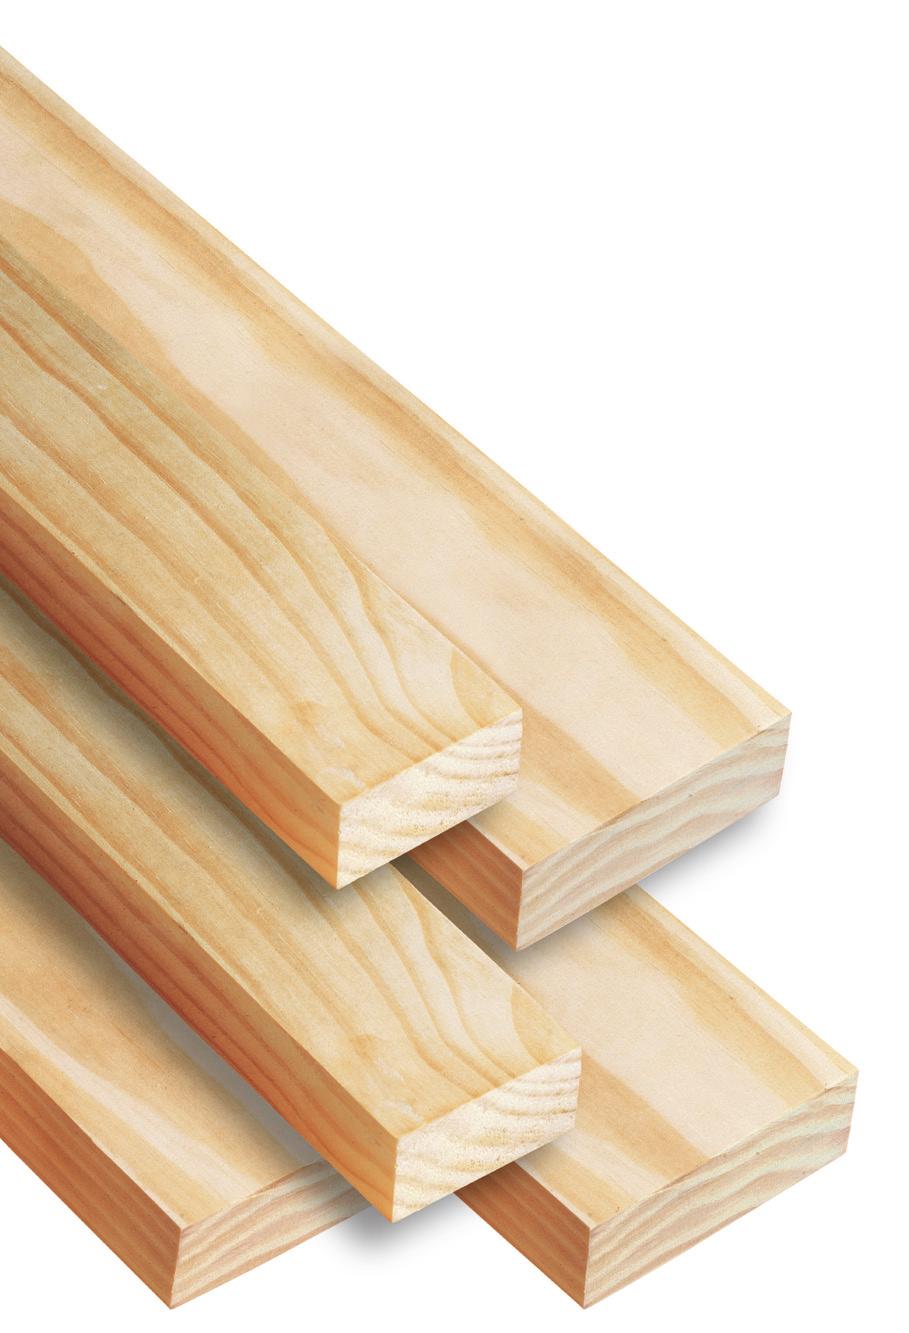 88m Finger Joint Pine Blanks Finger Joint Pine Blanks are precision milled for high quality and are consistently straight and uniform.